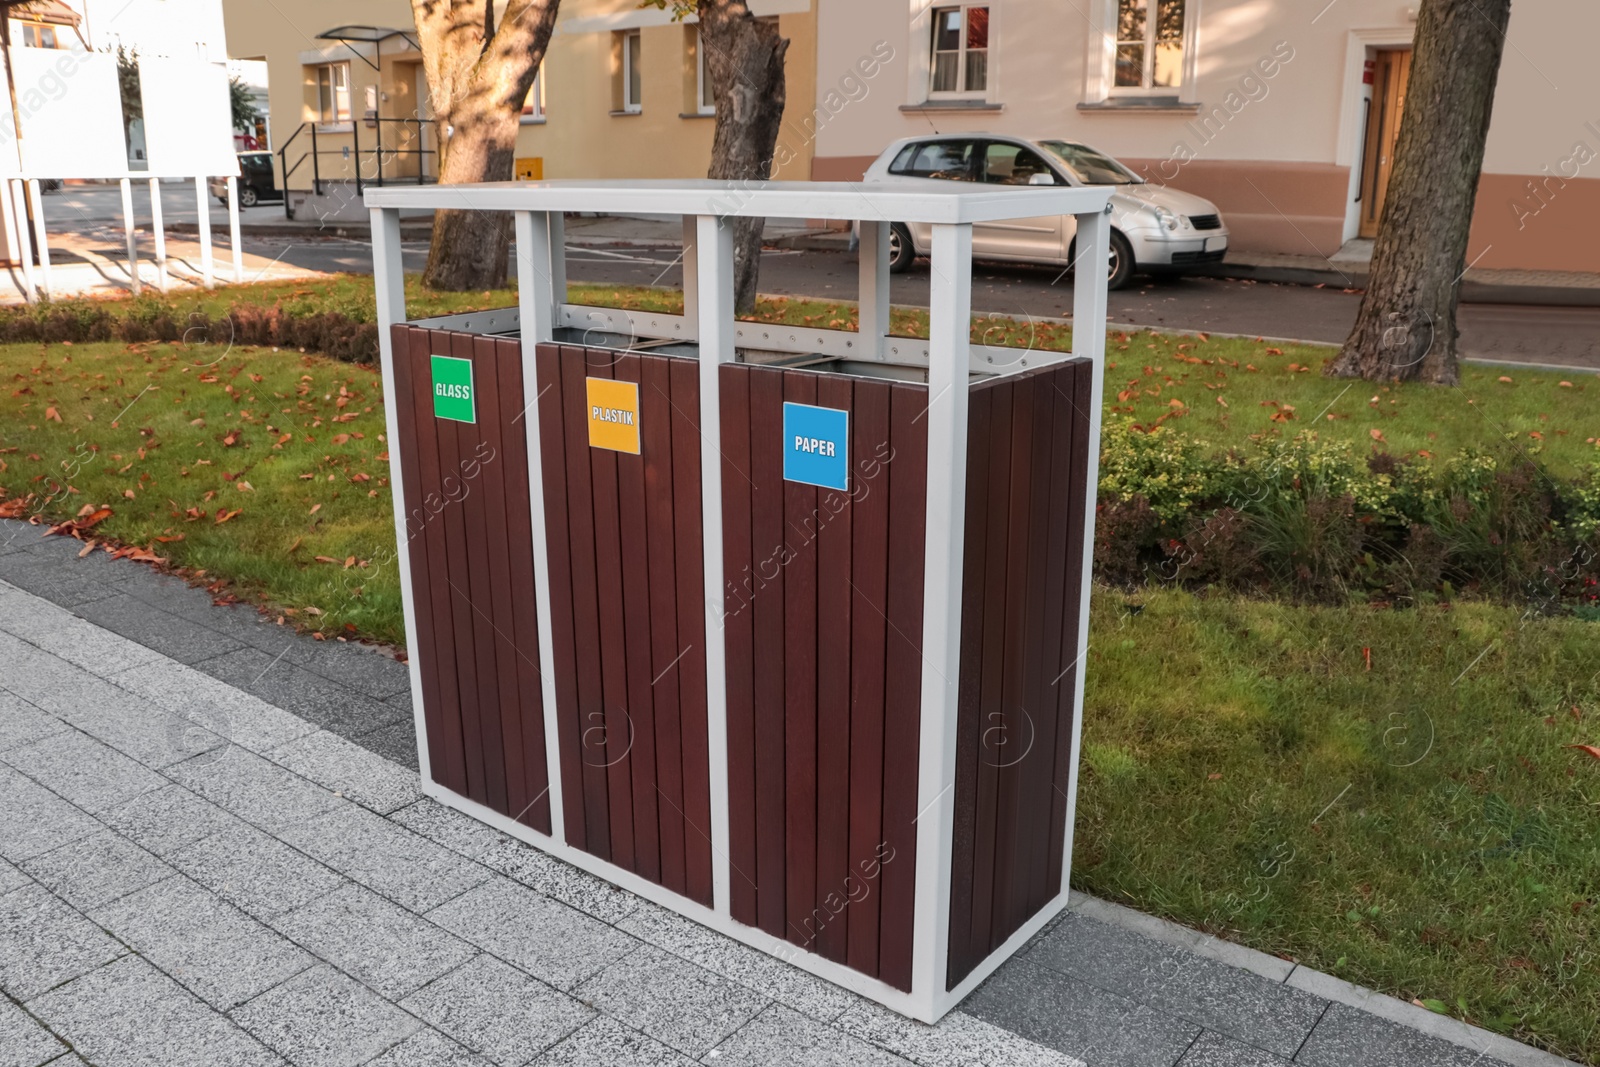 Photo of Different sorting bins for waste recycling on city street outdoors